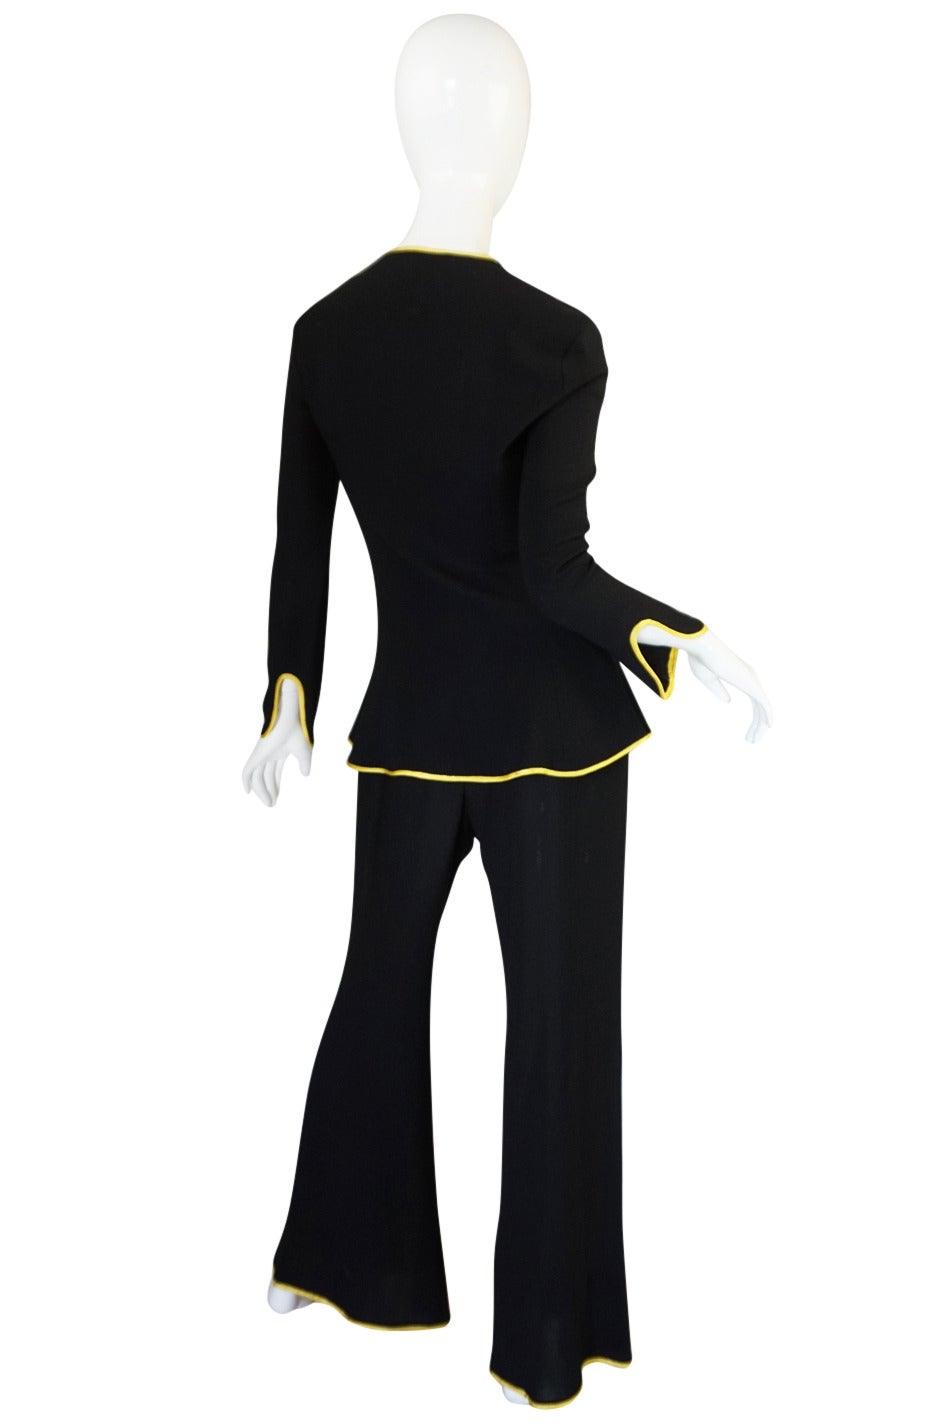 This is a classic design from Ossie Clark and I am pleased to have two versions of this land in the shop - this one with a yellow trim and a second with a green trim. I love the subtle sexiness of the suit - the 